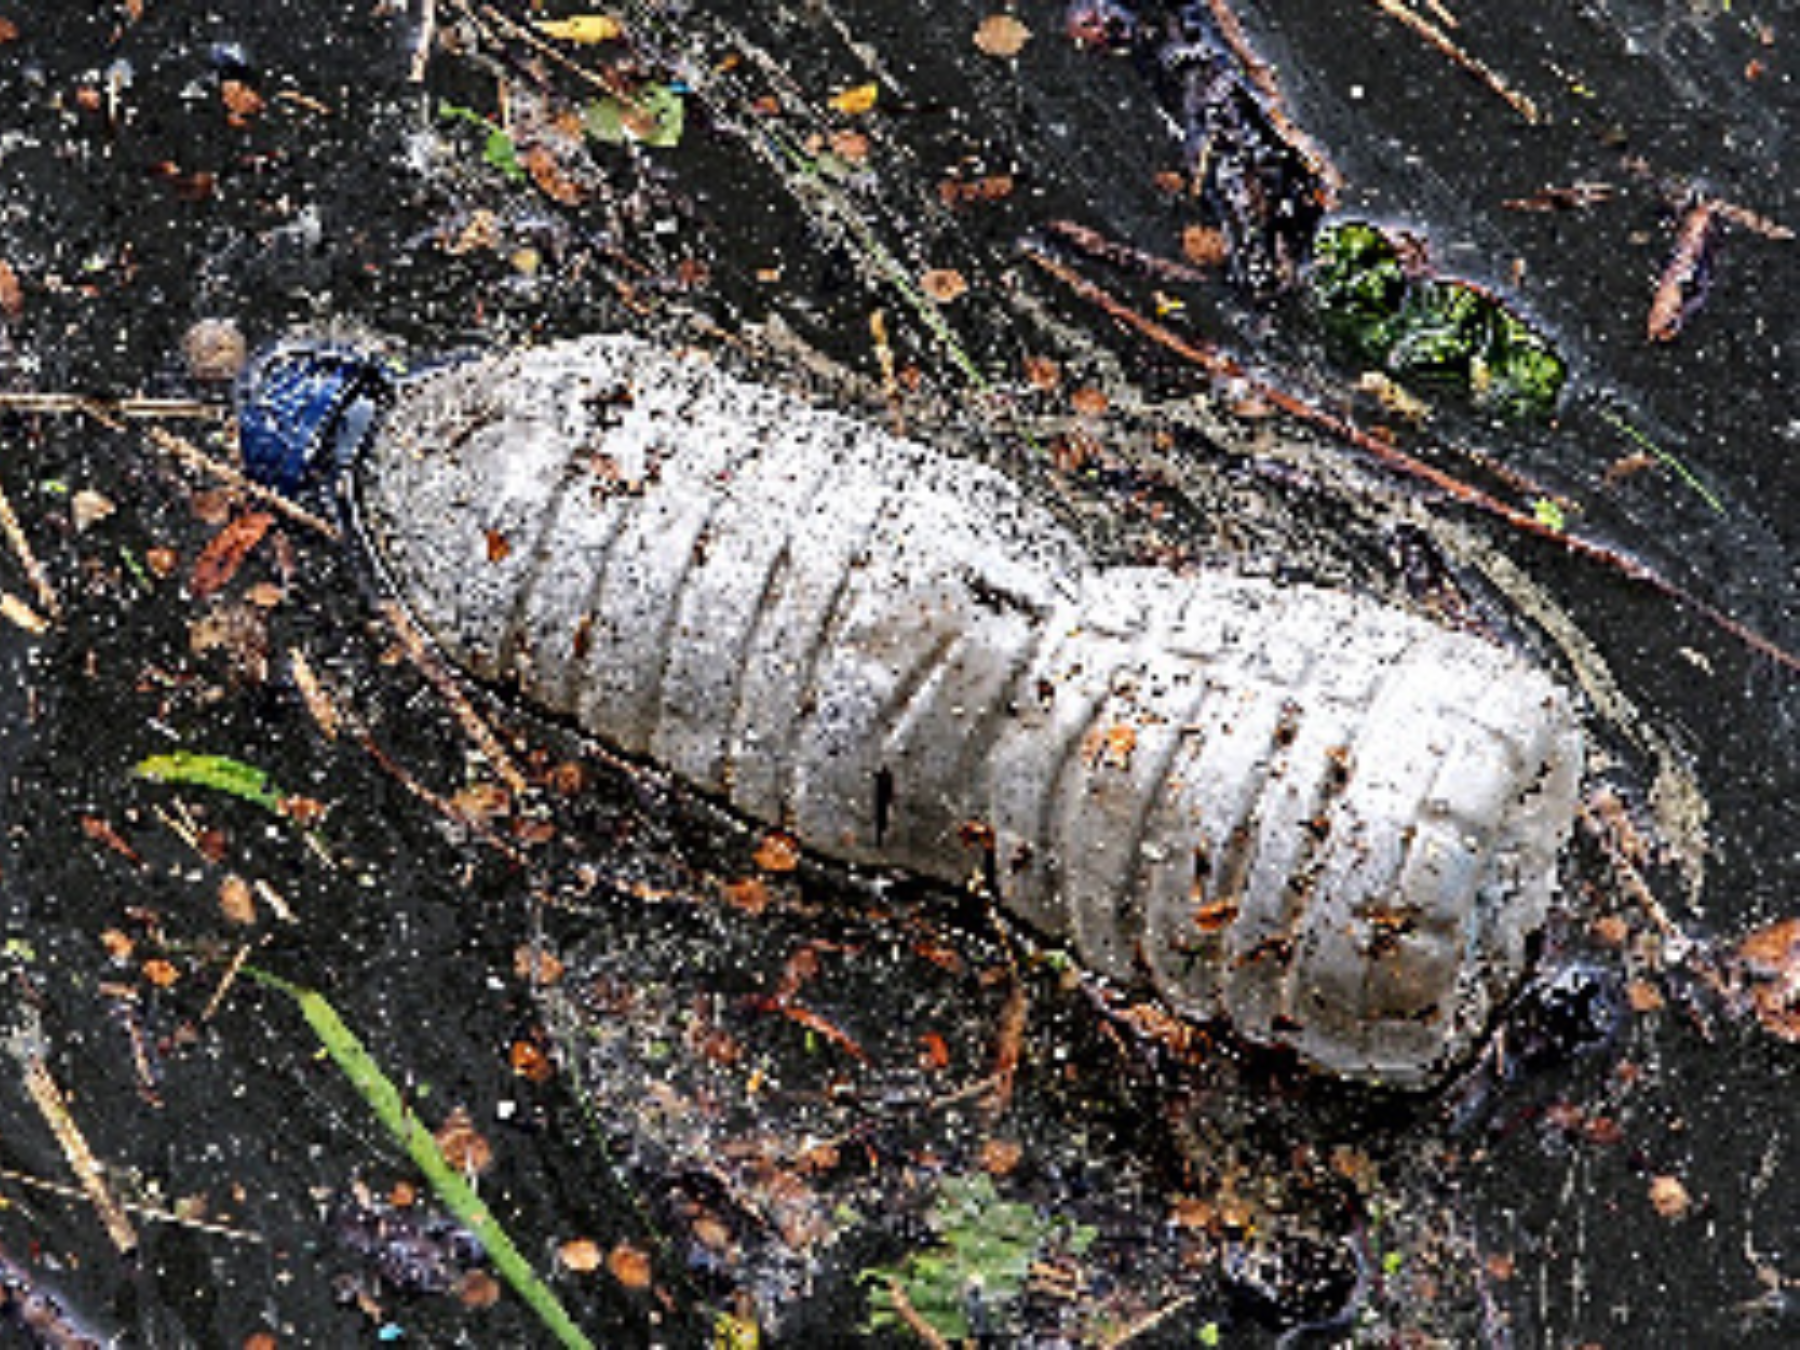 An image showing a plastic bottle thrown in nature.